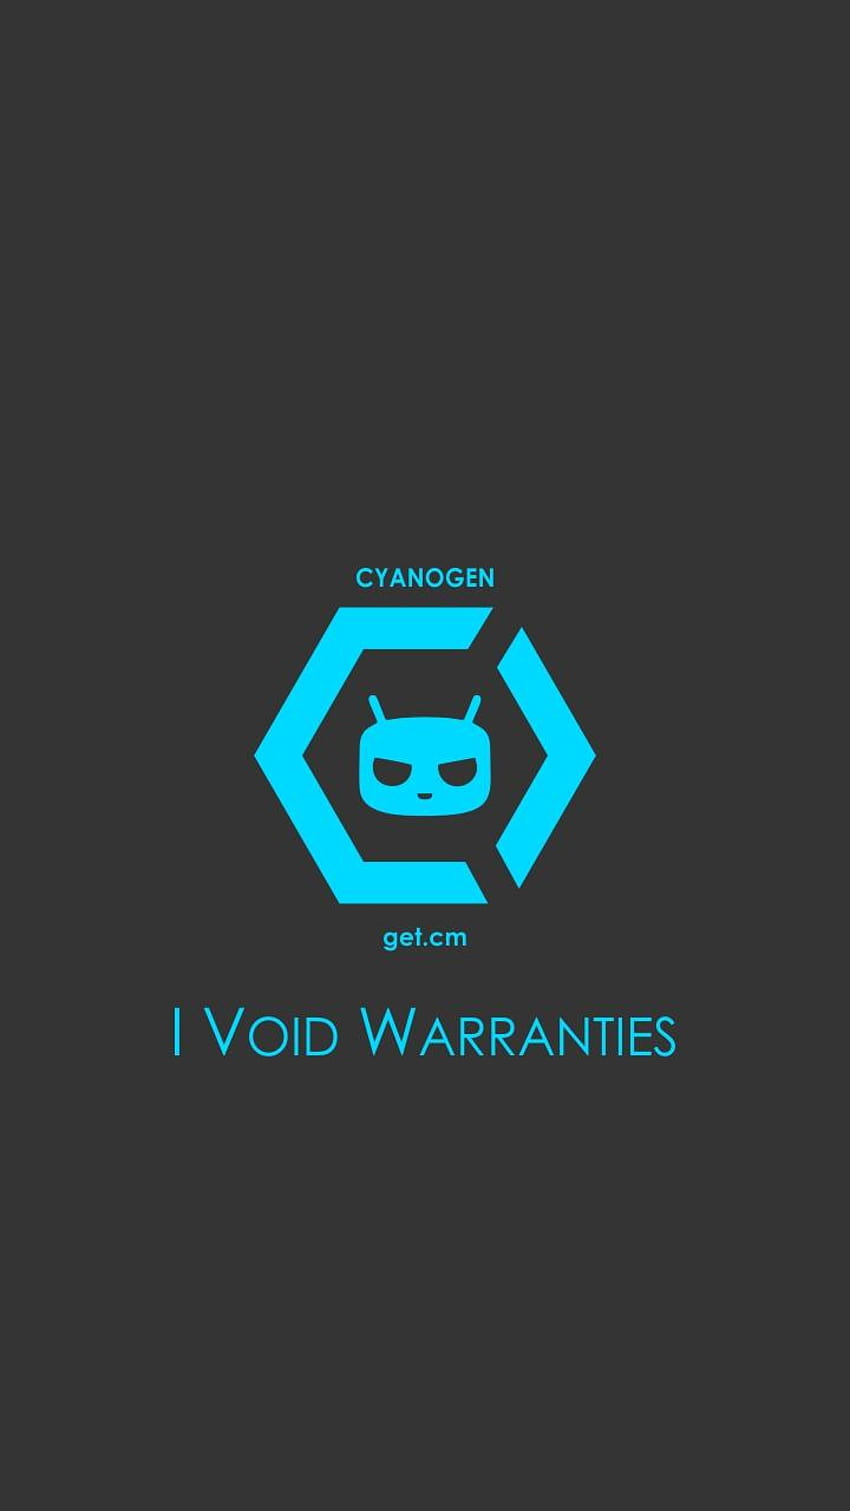 Try these CyanogenMod to liven up your custom HD phone wallpaper